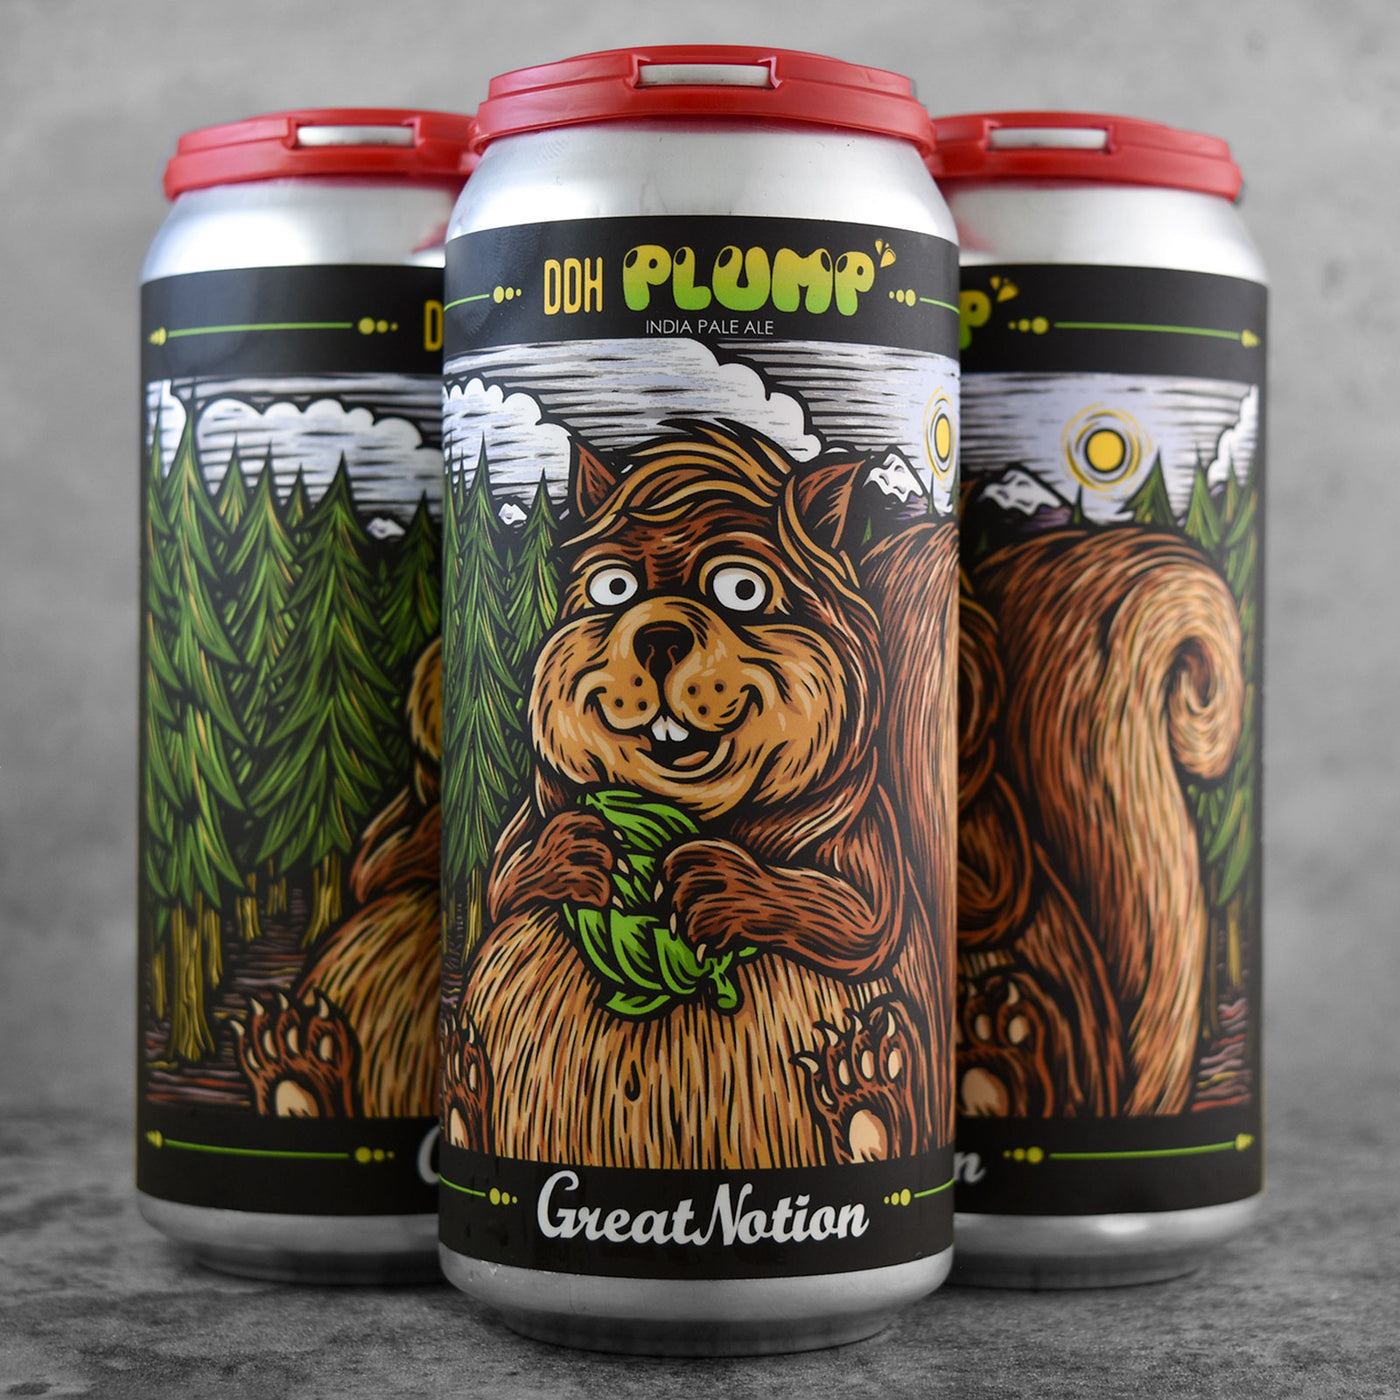 Great Notion DDH Plump - "Limit 2"